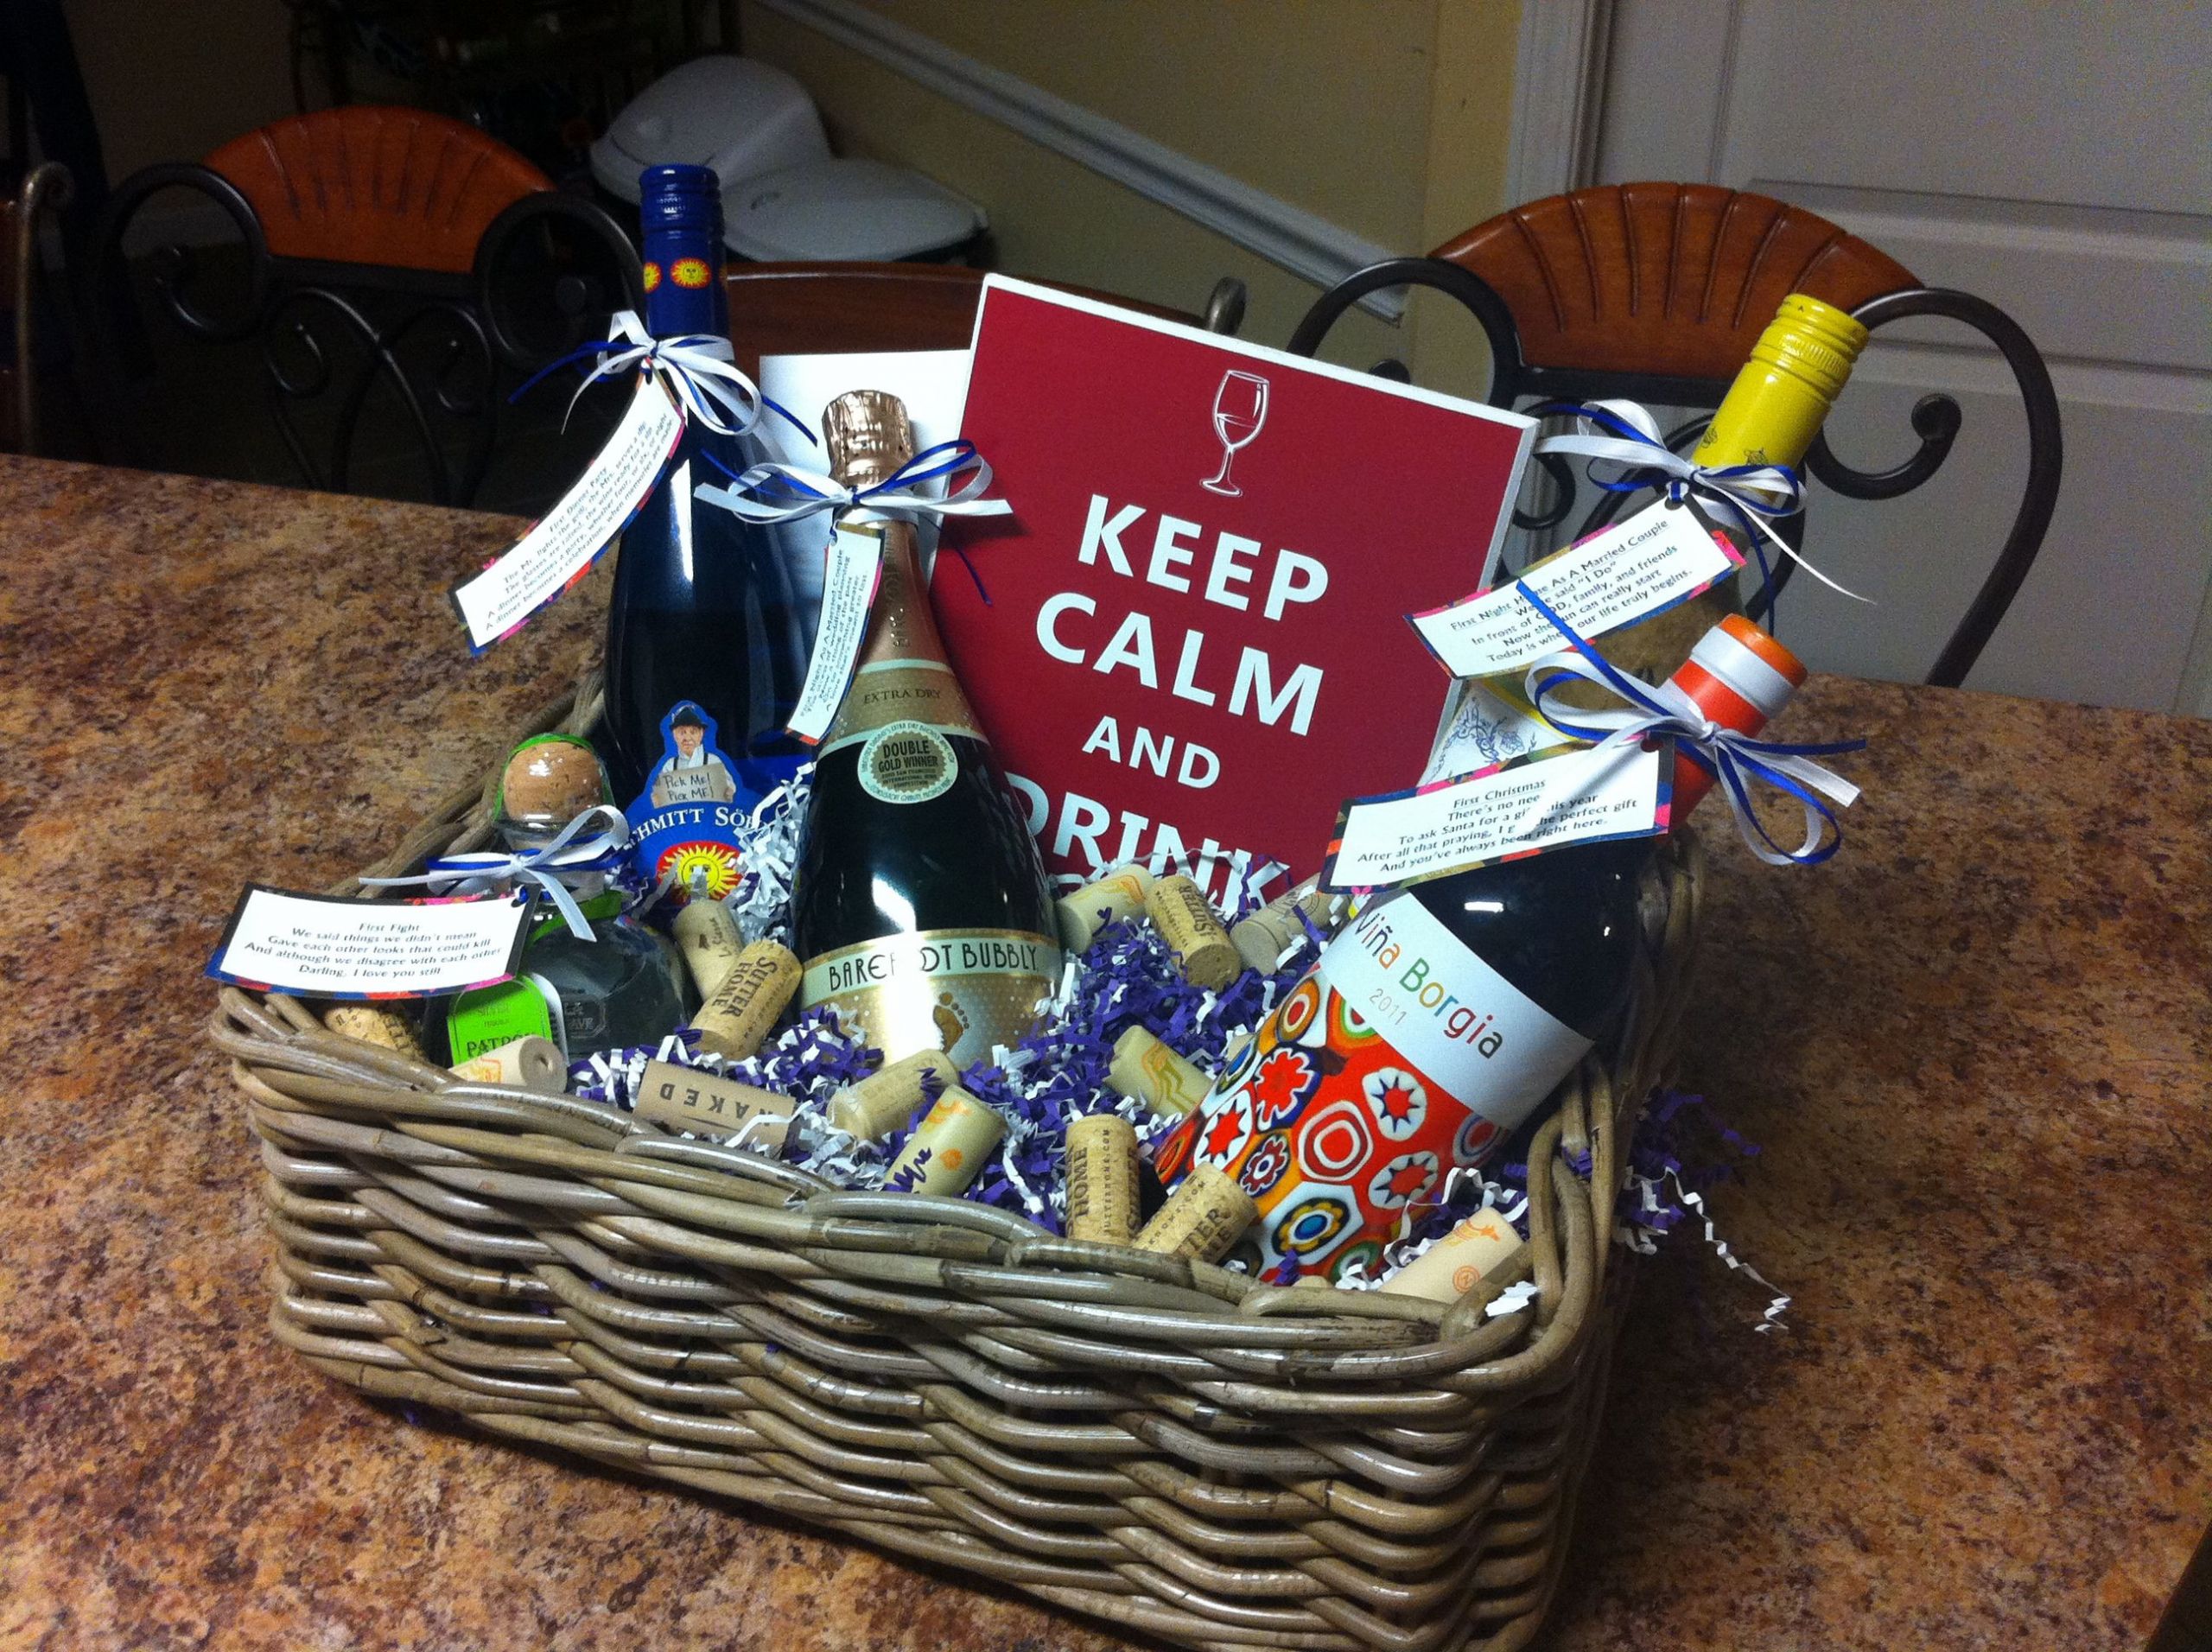 Stock The Bar Gift Basket Ideas
 "Basket of Firsts" for a stock the bar wedding shower